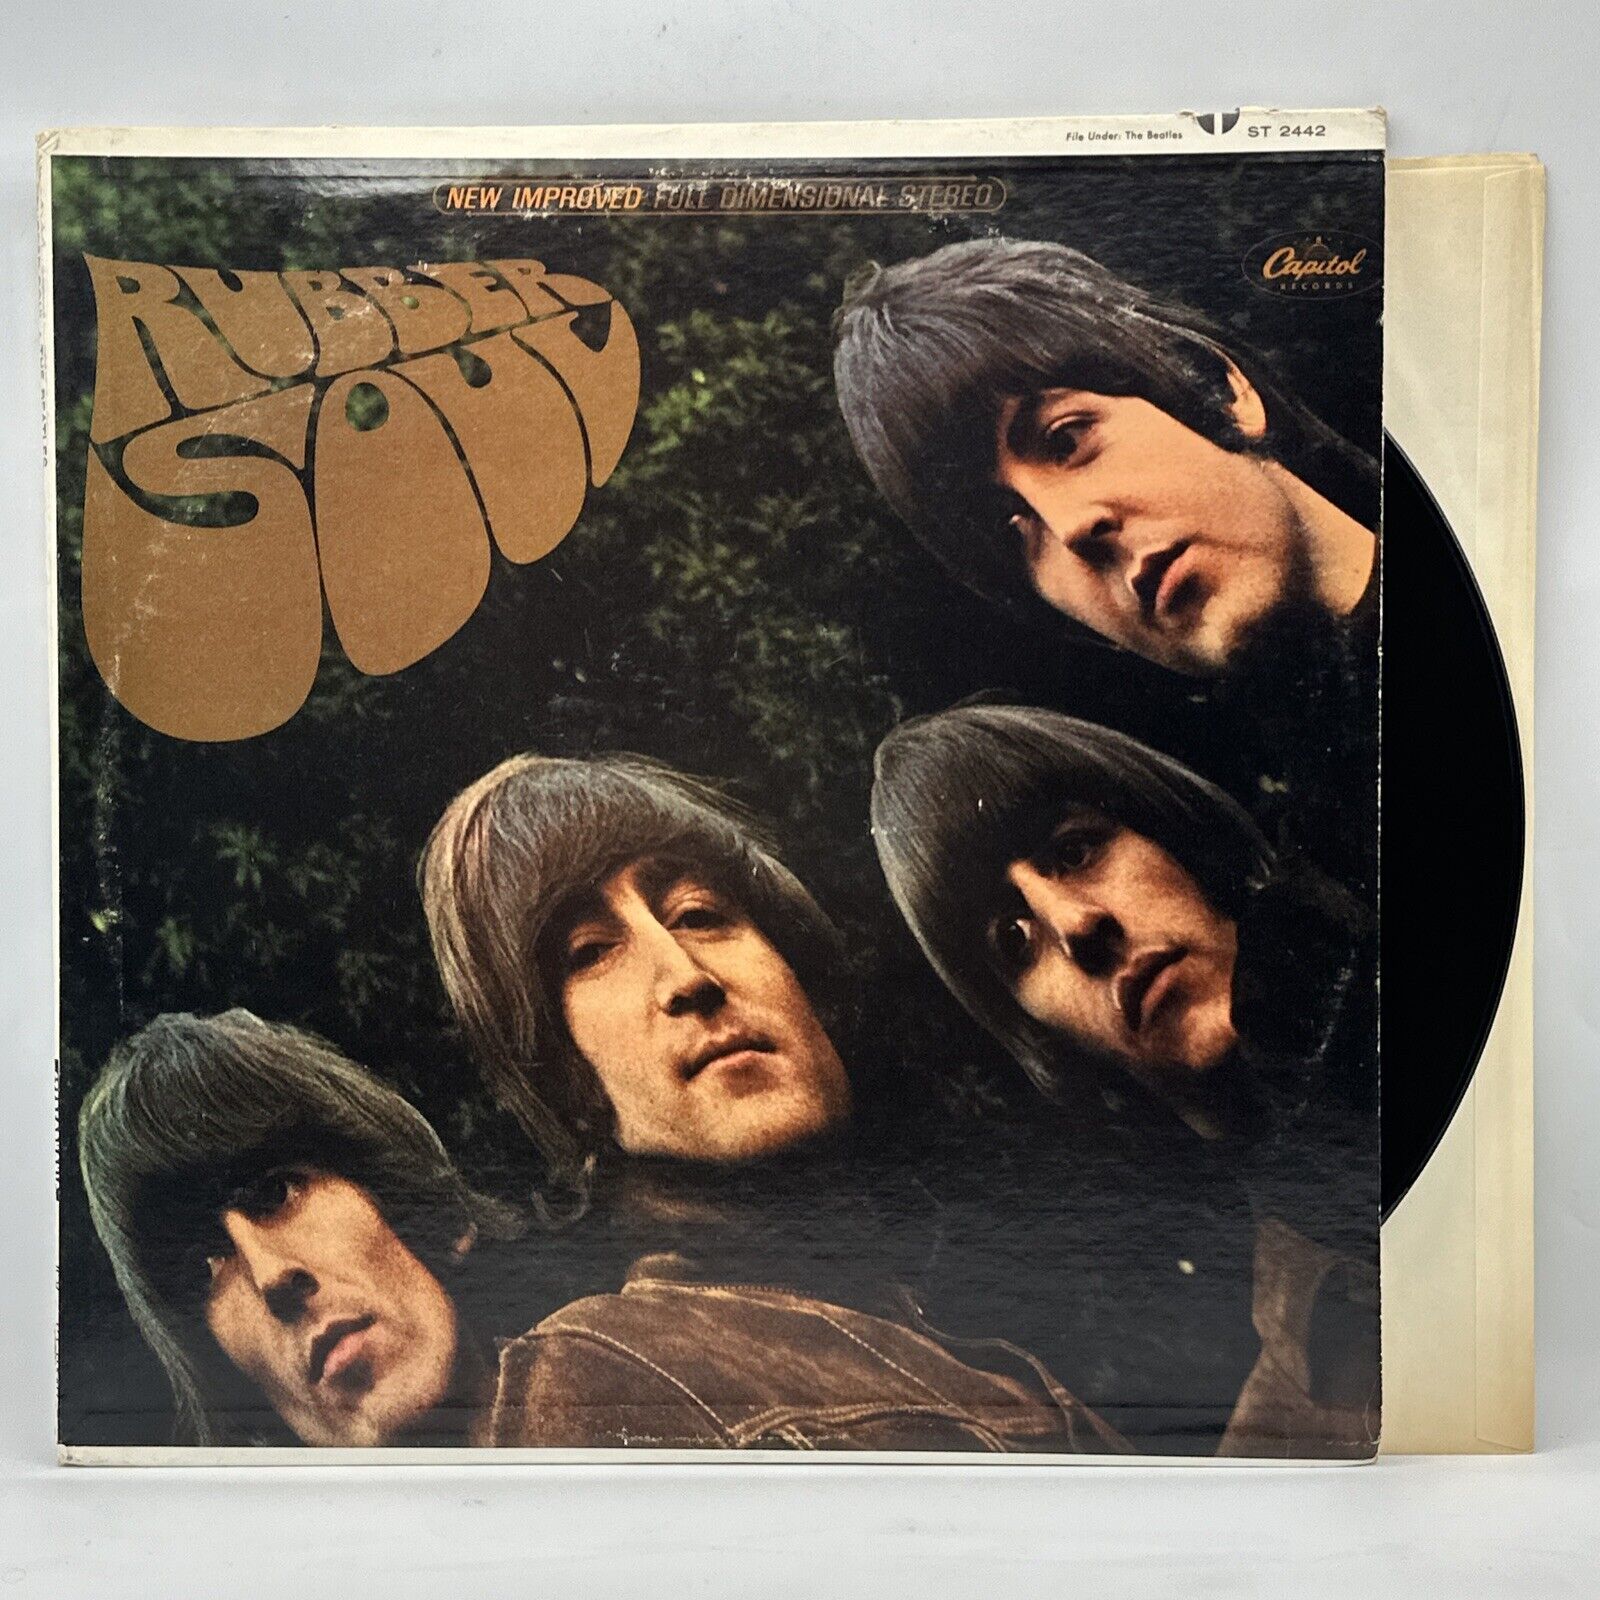 The Beatles - Rubber Soul - 1968 US Stereo Capitol ST-2442 (NM) Ultrasonic Clean